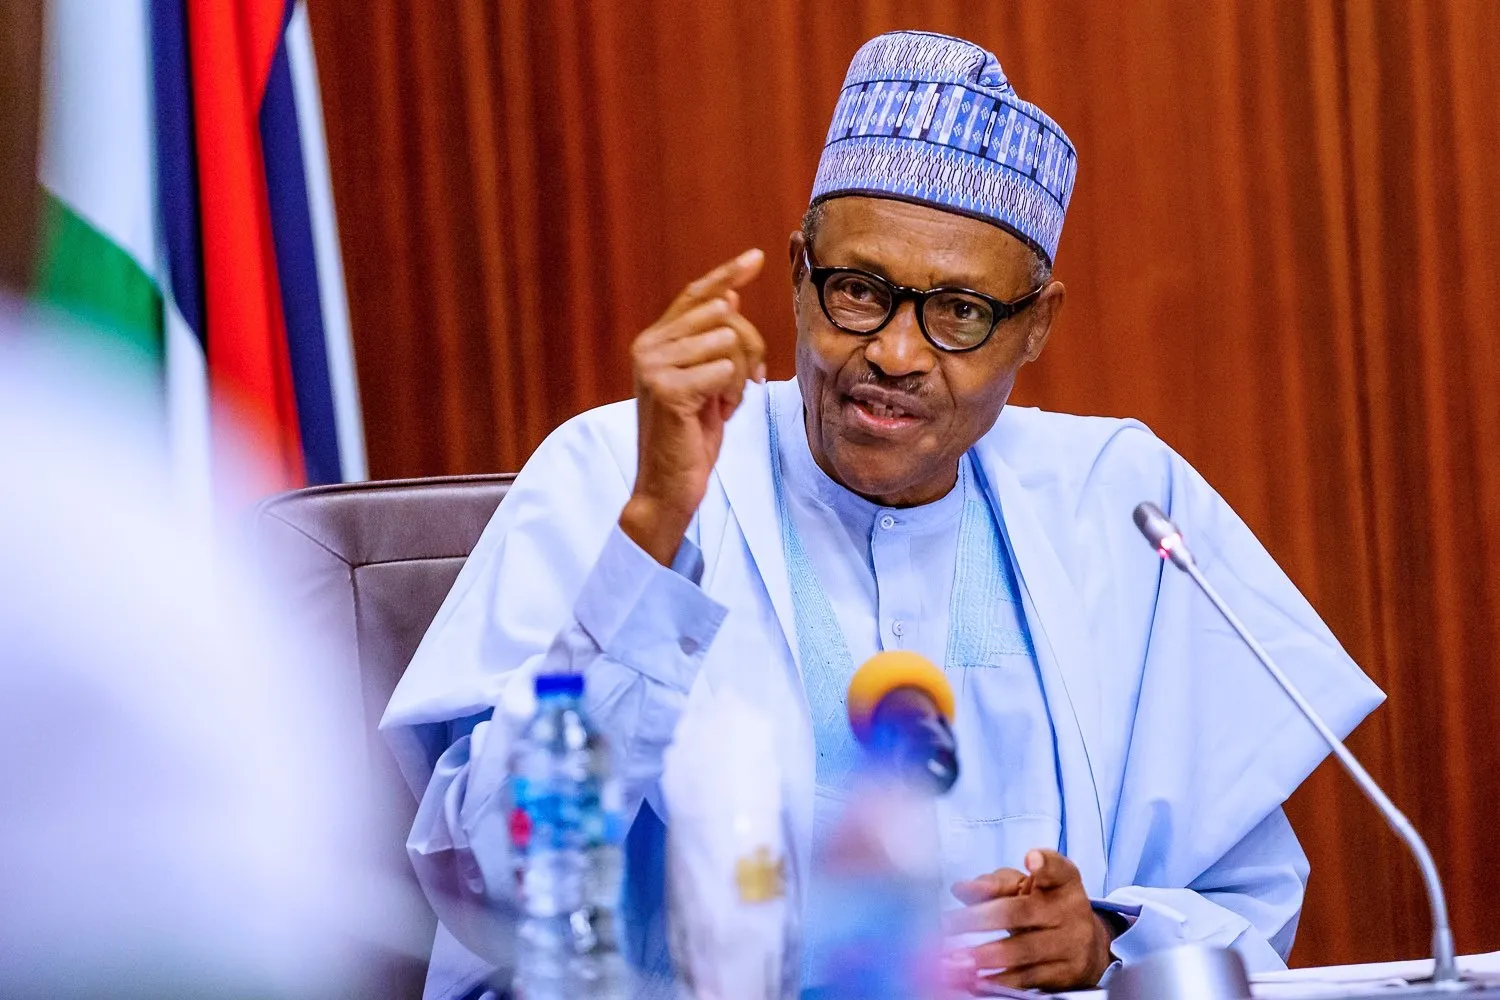 Naira Redesign Not Meant To Cause Hardship - Buhari To Nigerians  